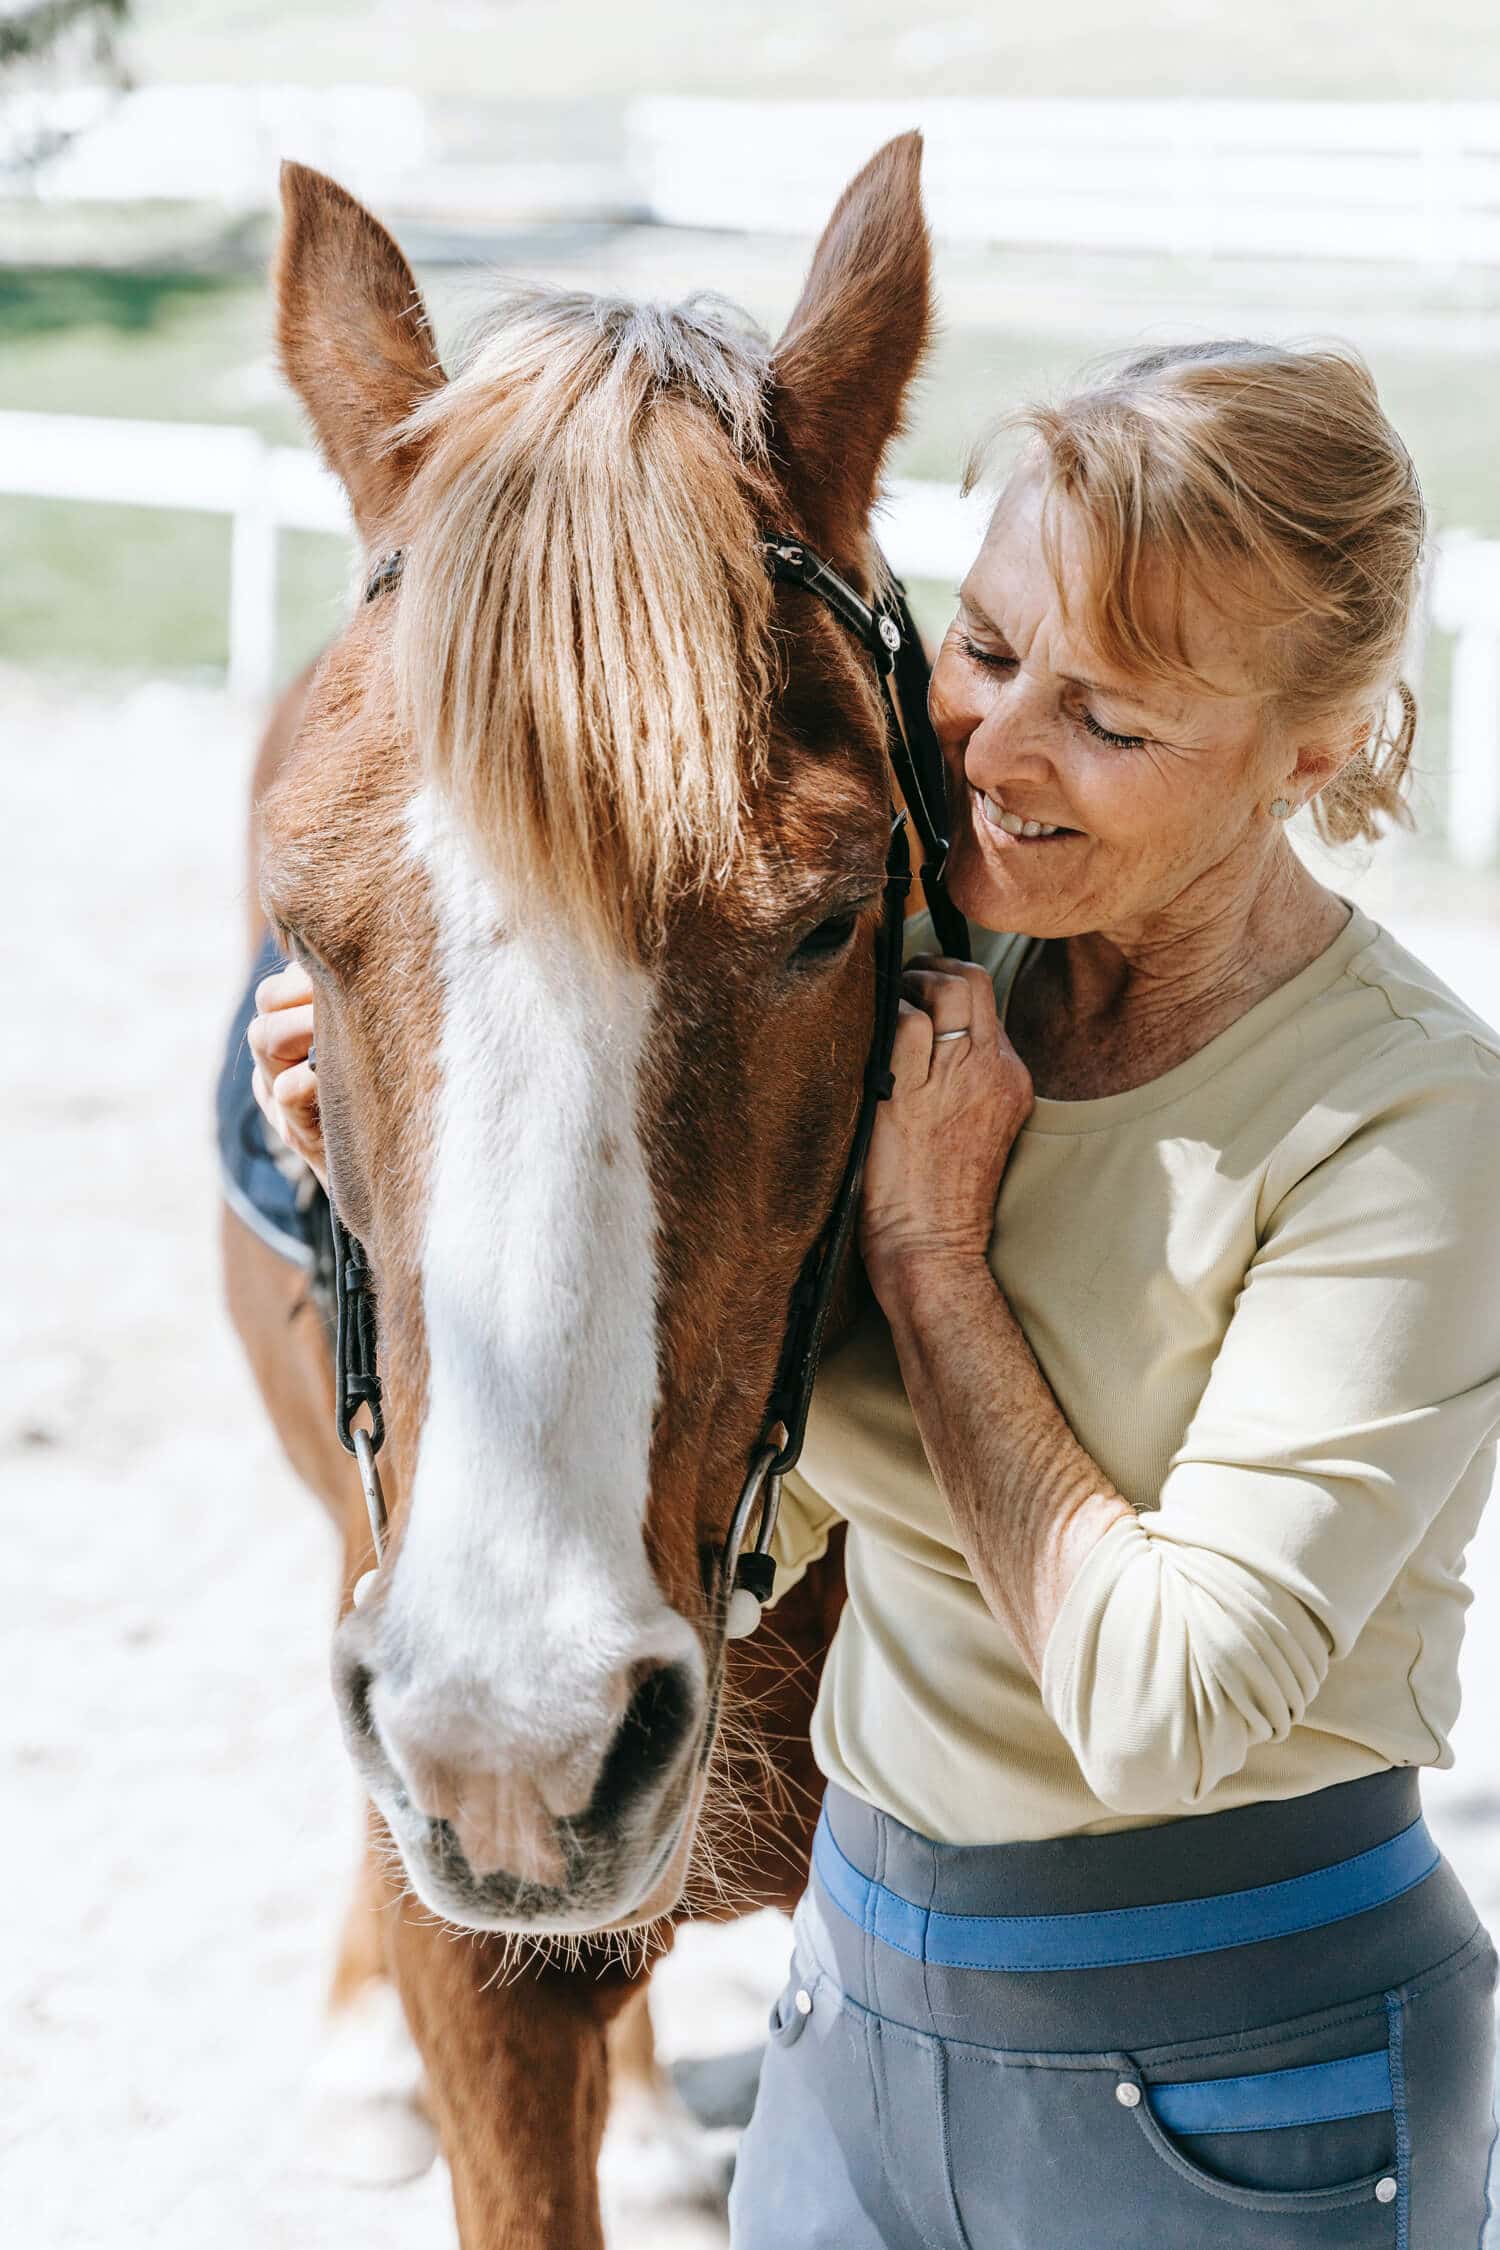 When should I retire my horse?